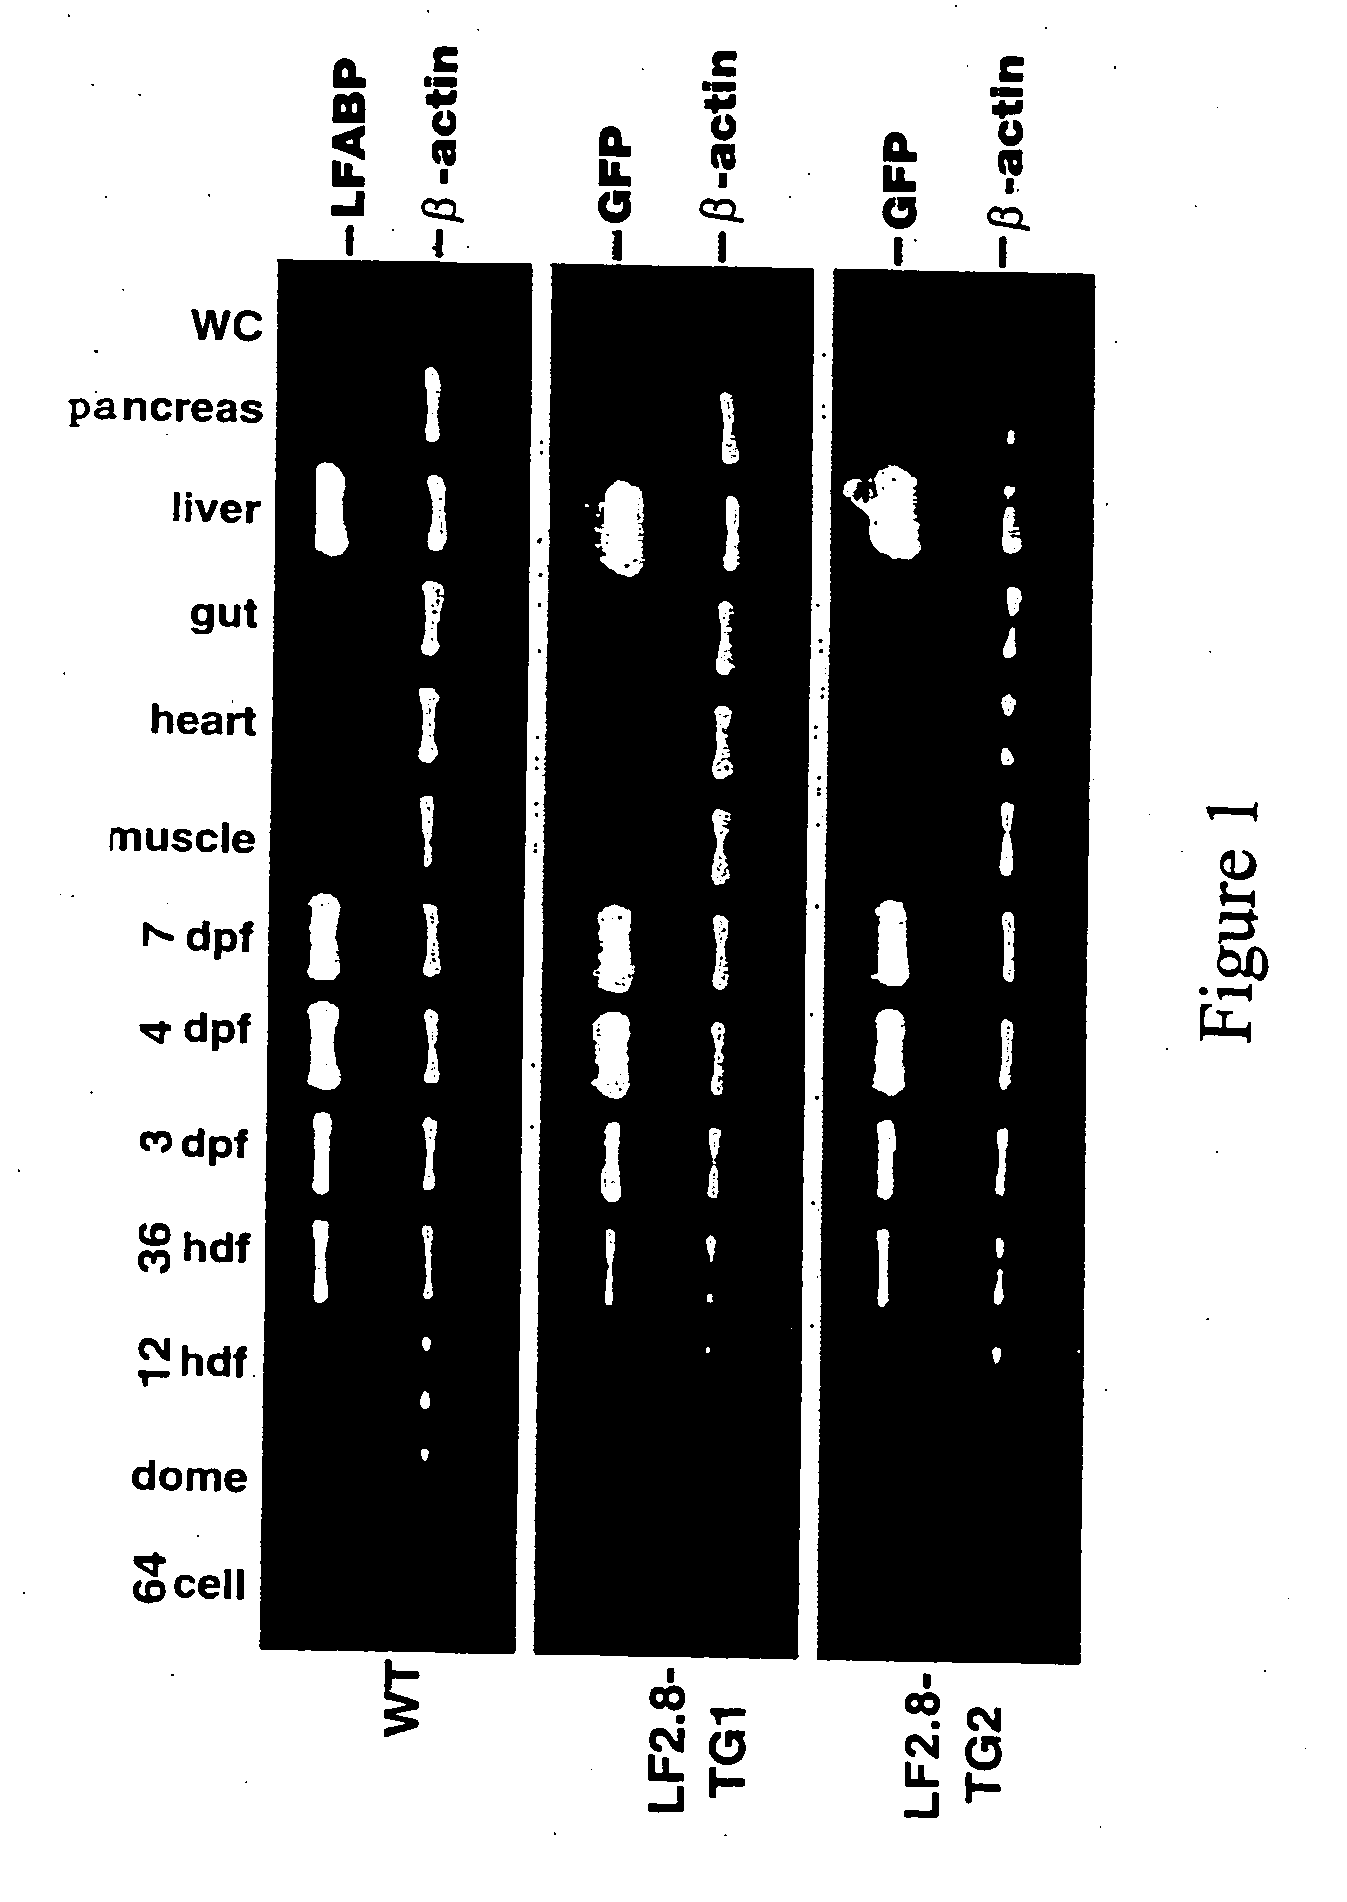 Transgenic fish germline expression driven by liver fatty acid binding protein (L-FABP) gene promoter and applications thereof